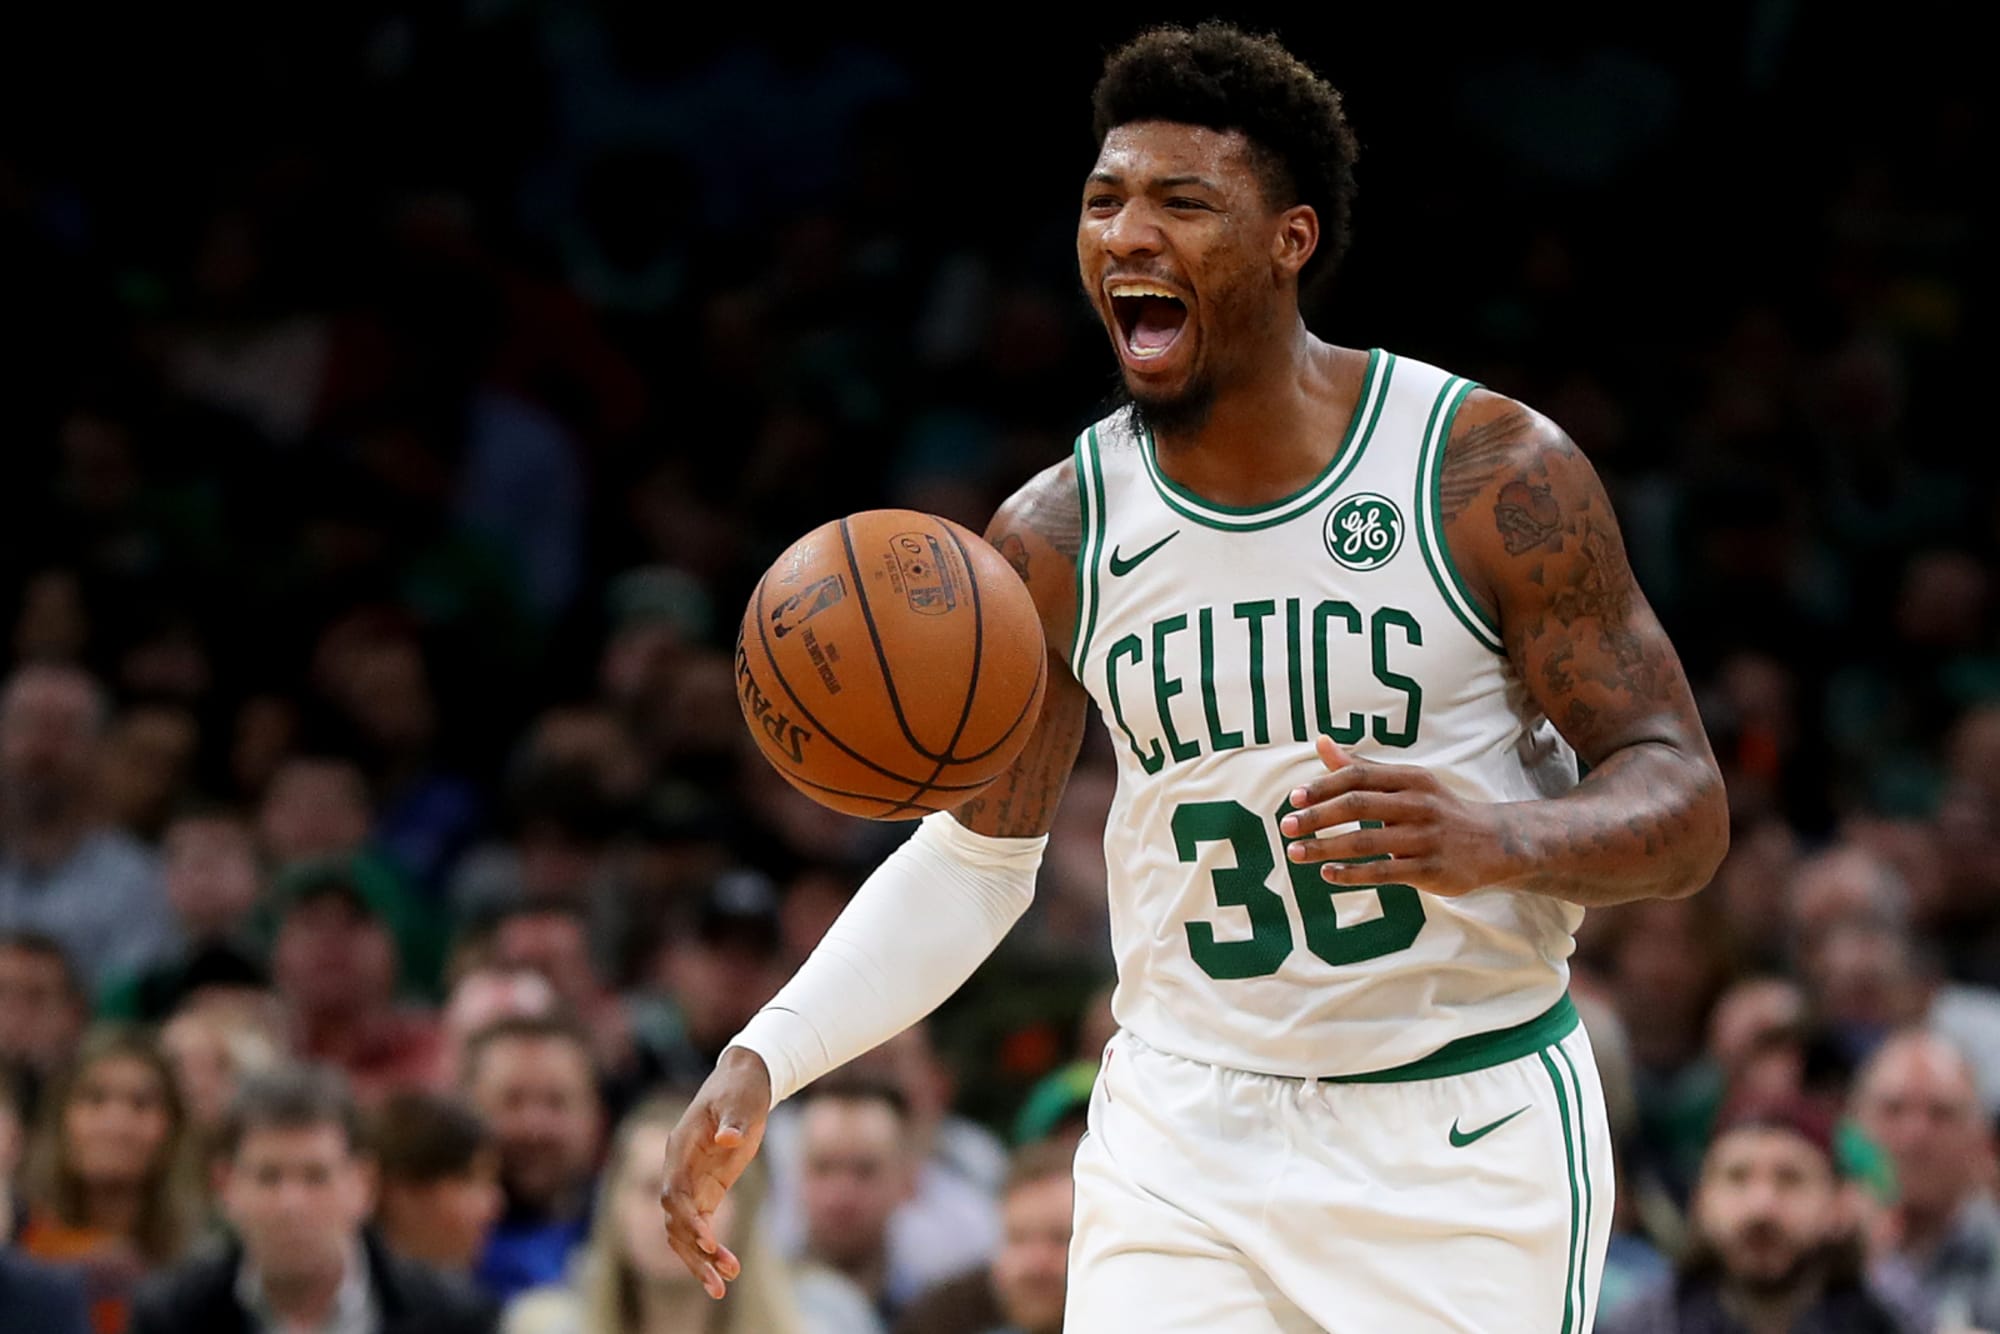 Boston Celtics: Marcus Smart and his newfound shooting abilities